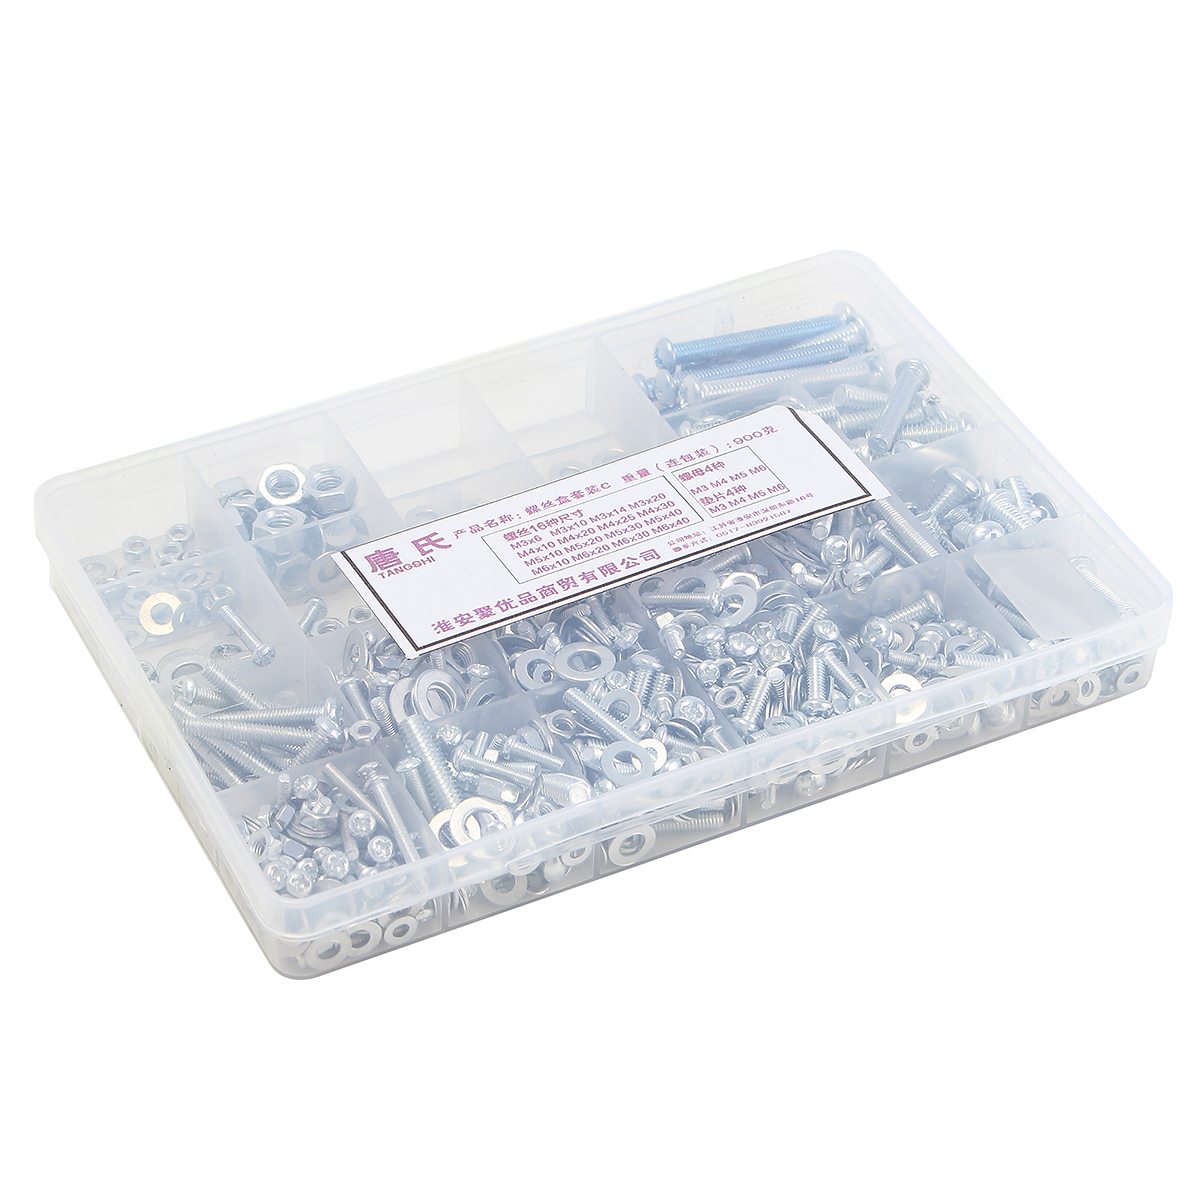 M3-M4-M5-M6-Stainless-Steel-Phillips-Round-Head-Screws-Nuts-Flat-Washers-Assortment-Kit-900g-1194476-10